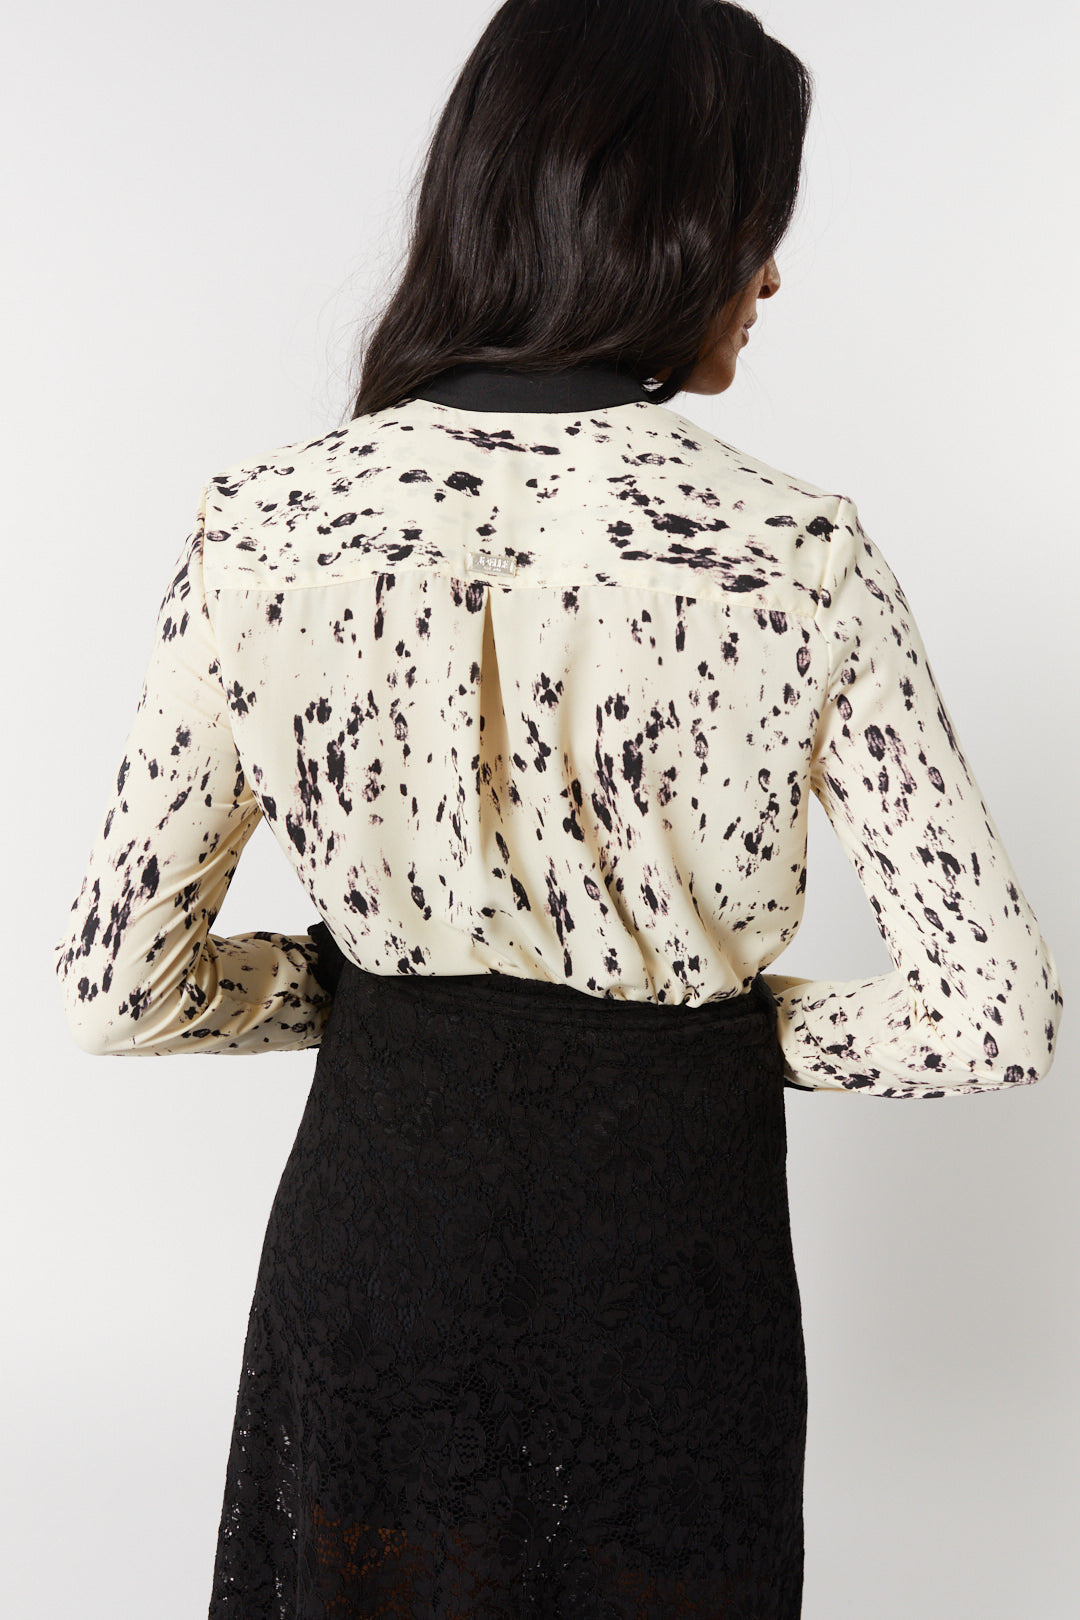 Ivory shirt with black spotted patterns | Madsen